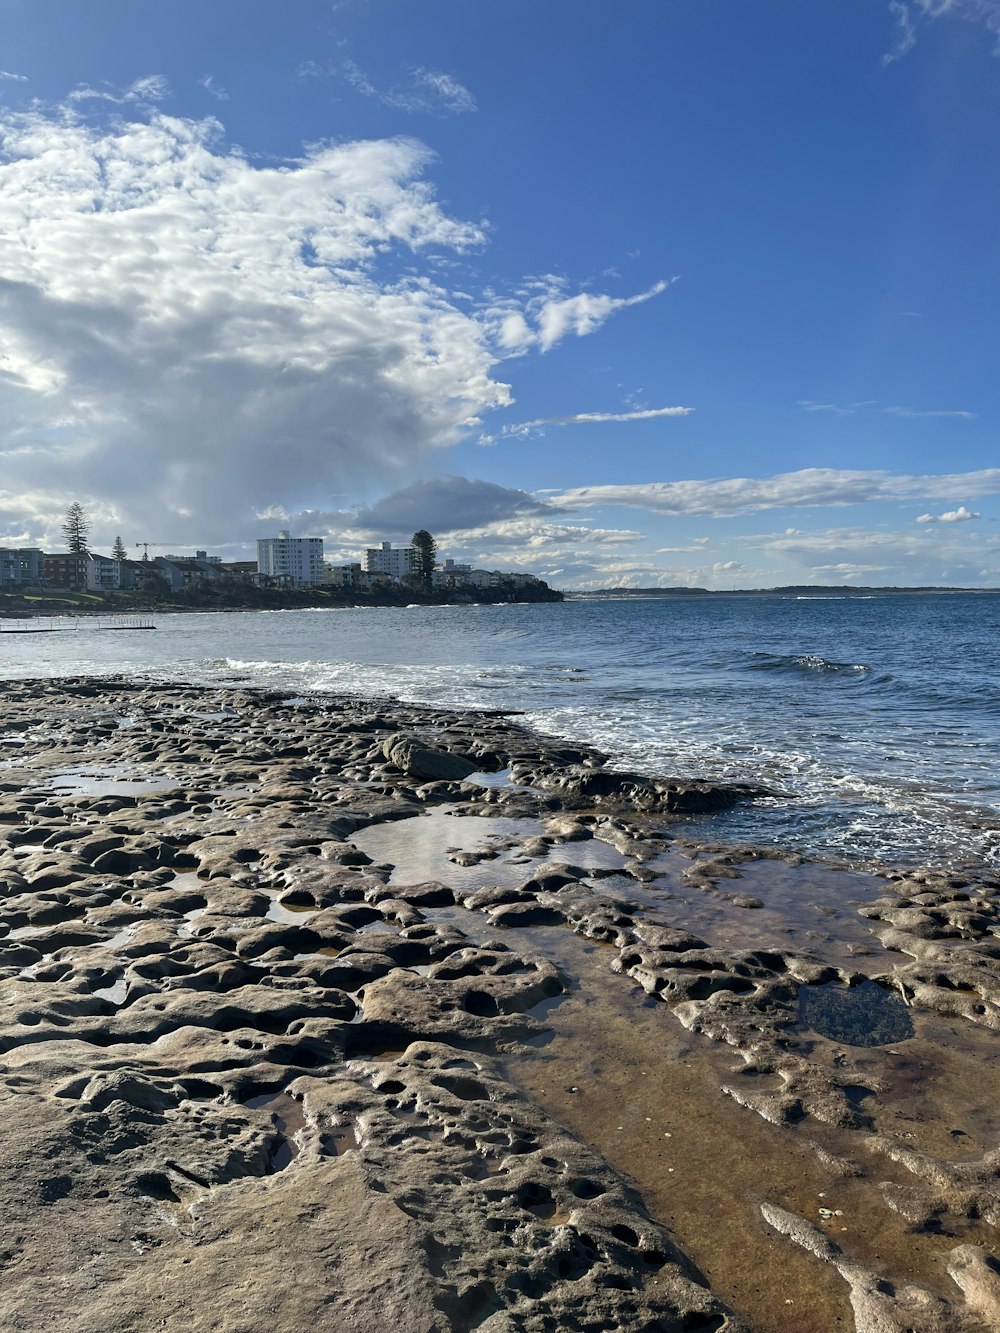 a rocky beach with buildings in the background